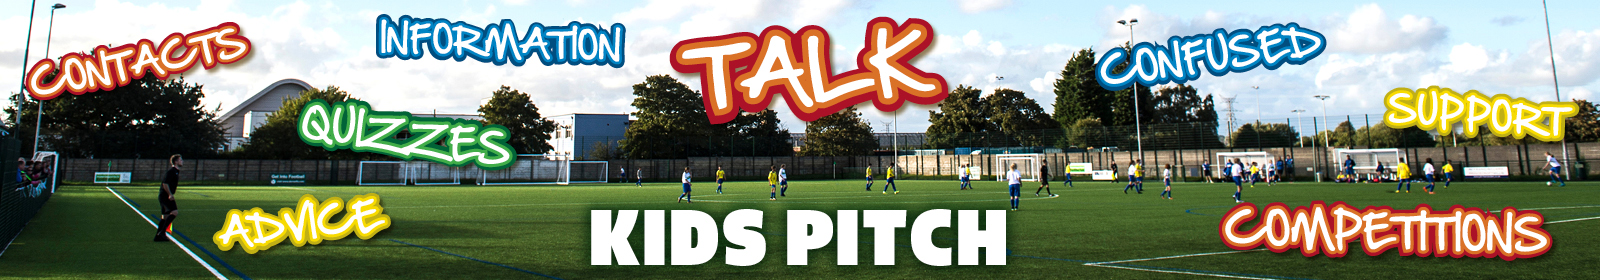 Kids Pitch Banner New